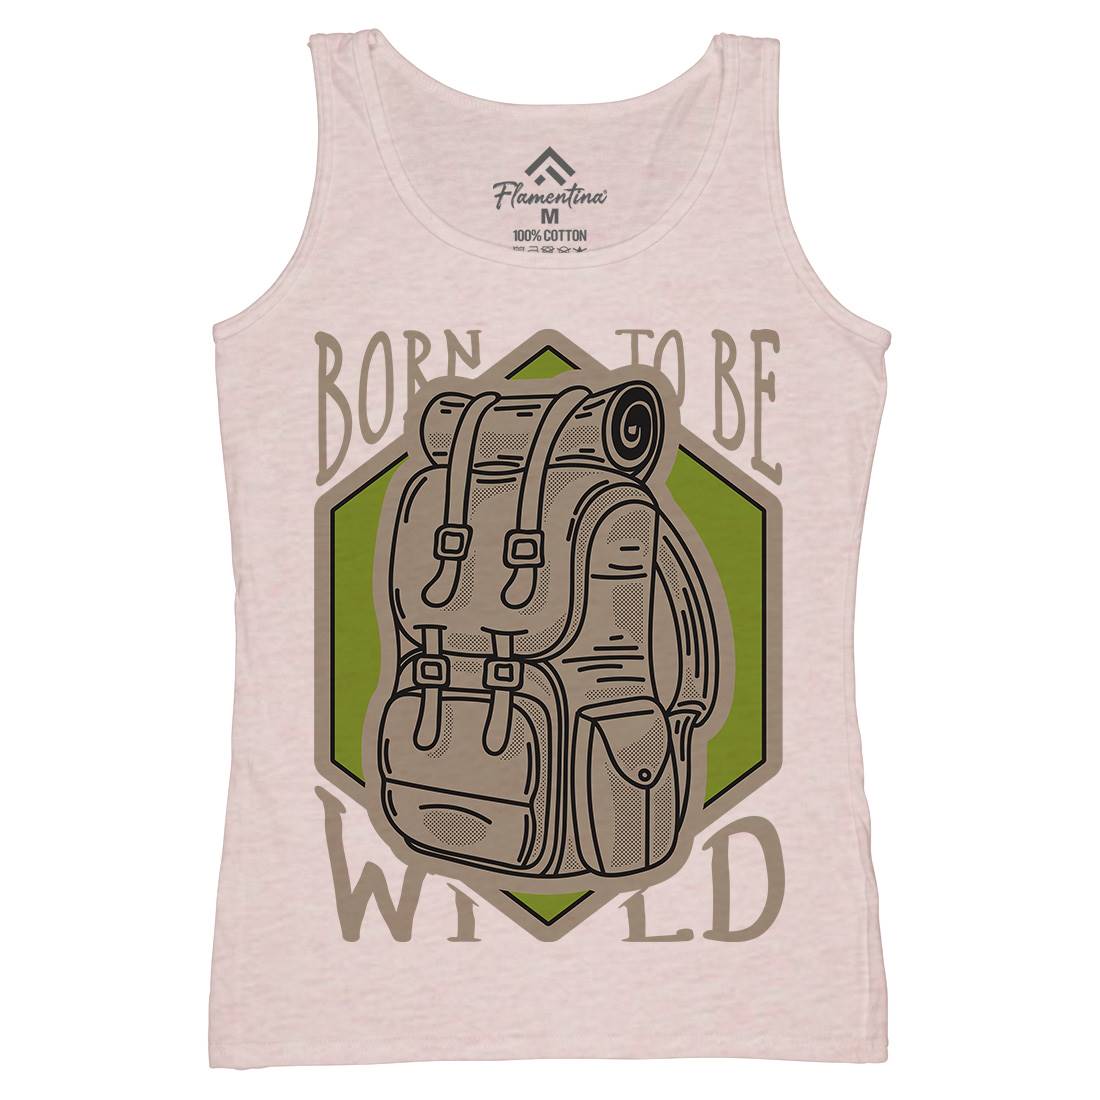 Born To Be Wild Womens Organic Tank Top Vest Nature D912